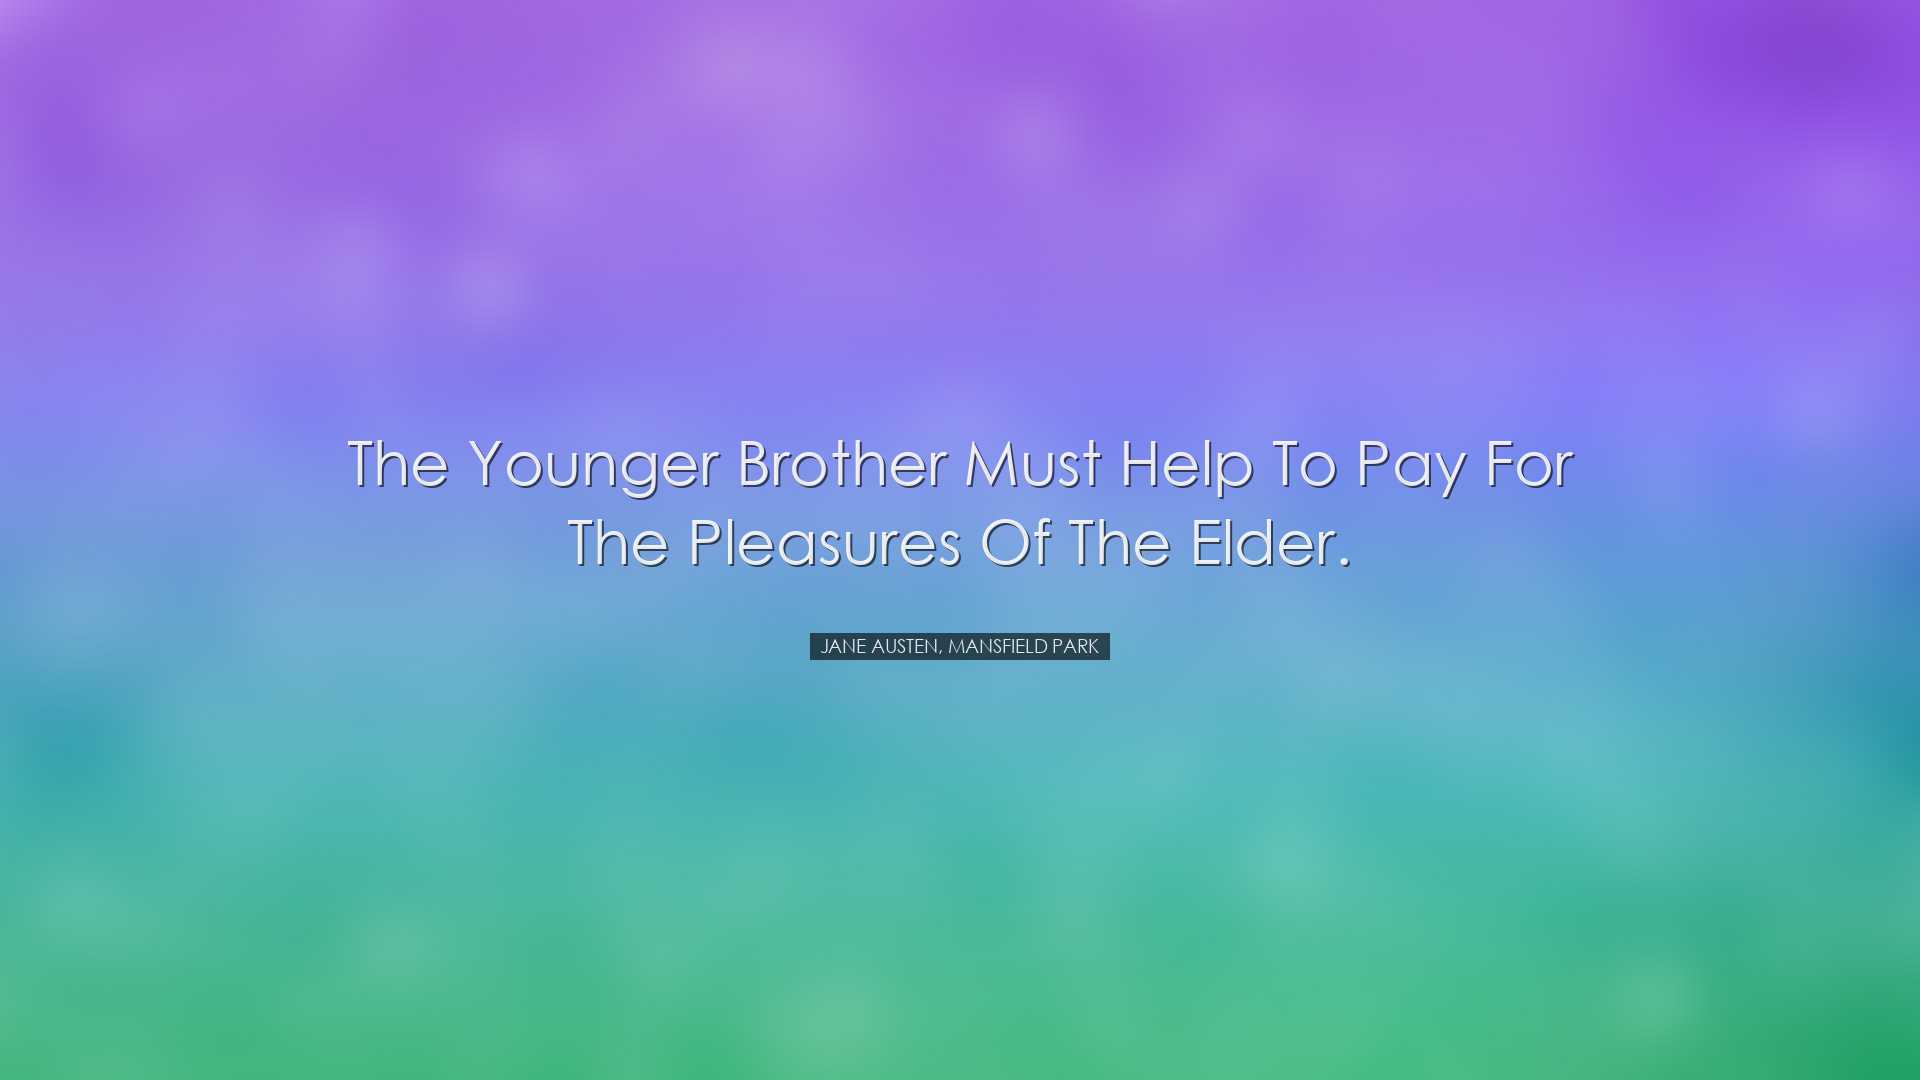 The younger brother must help to pay for the pleasures of the elde